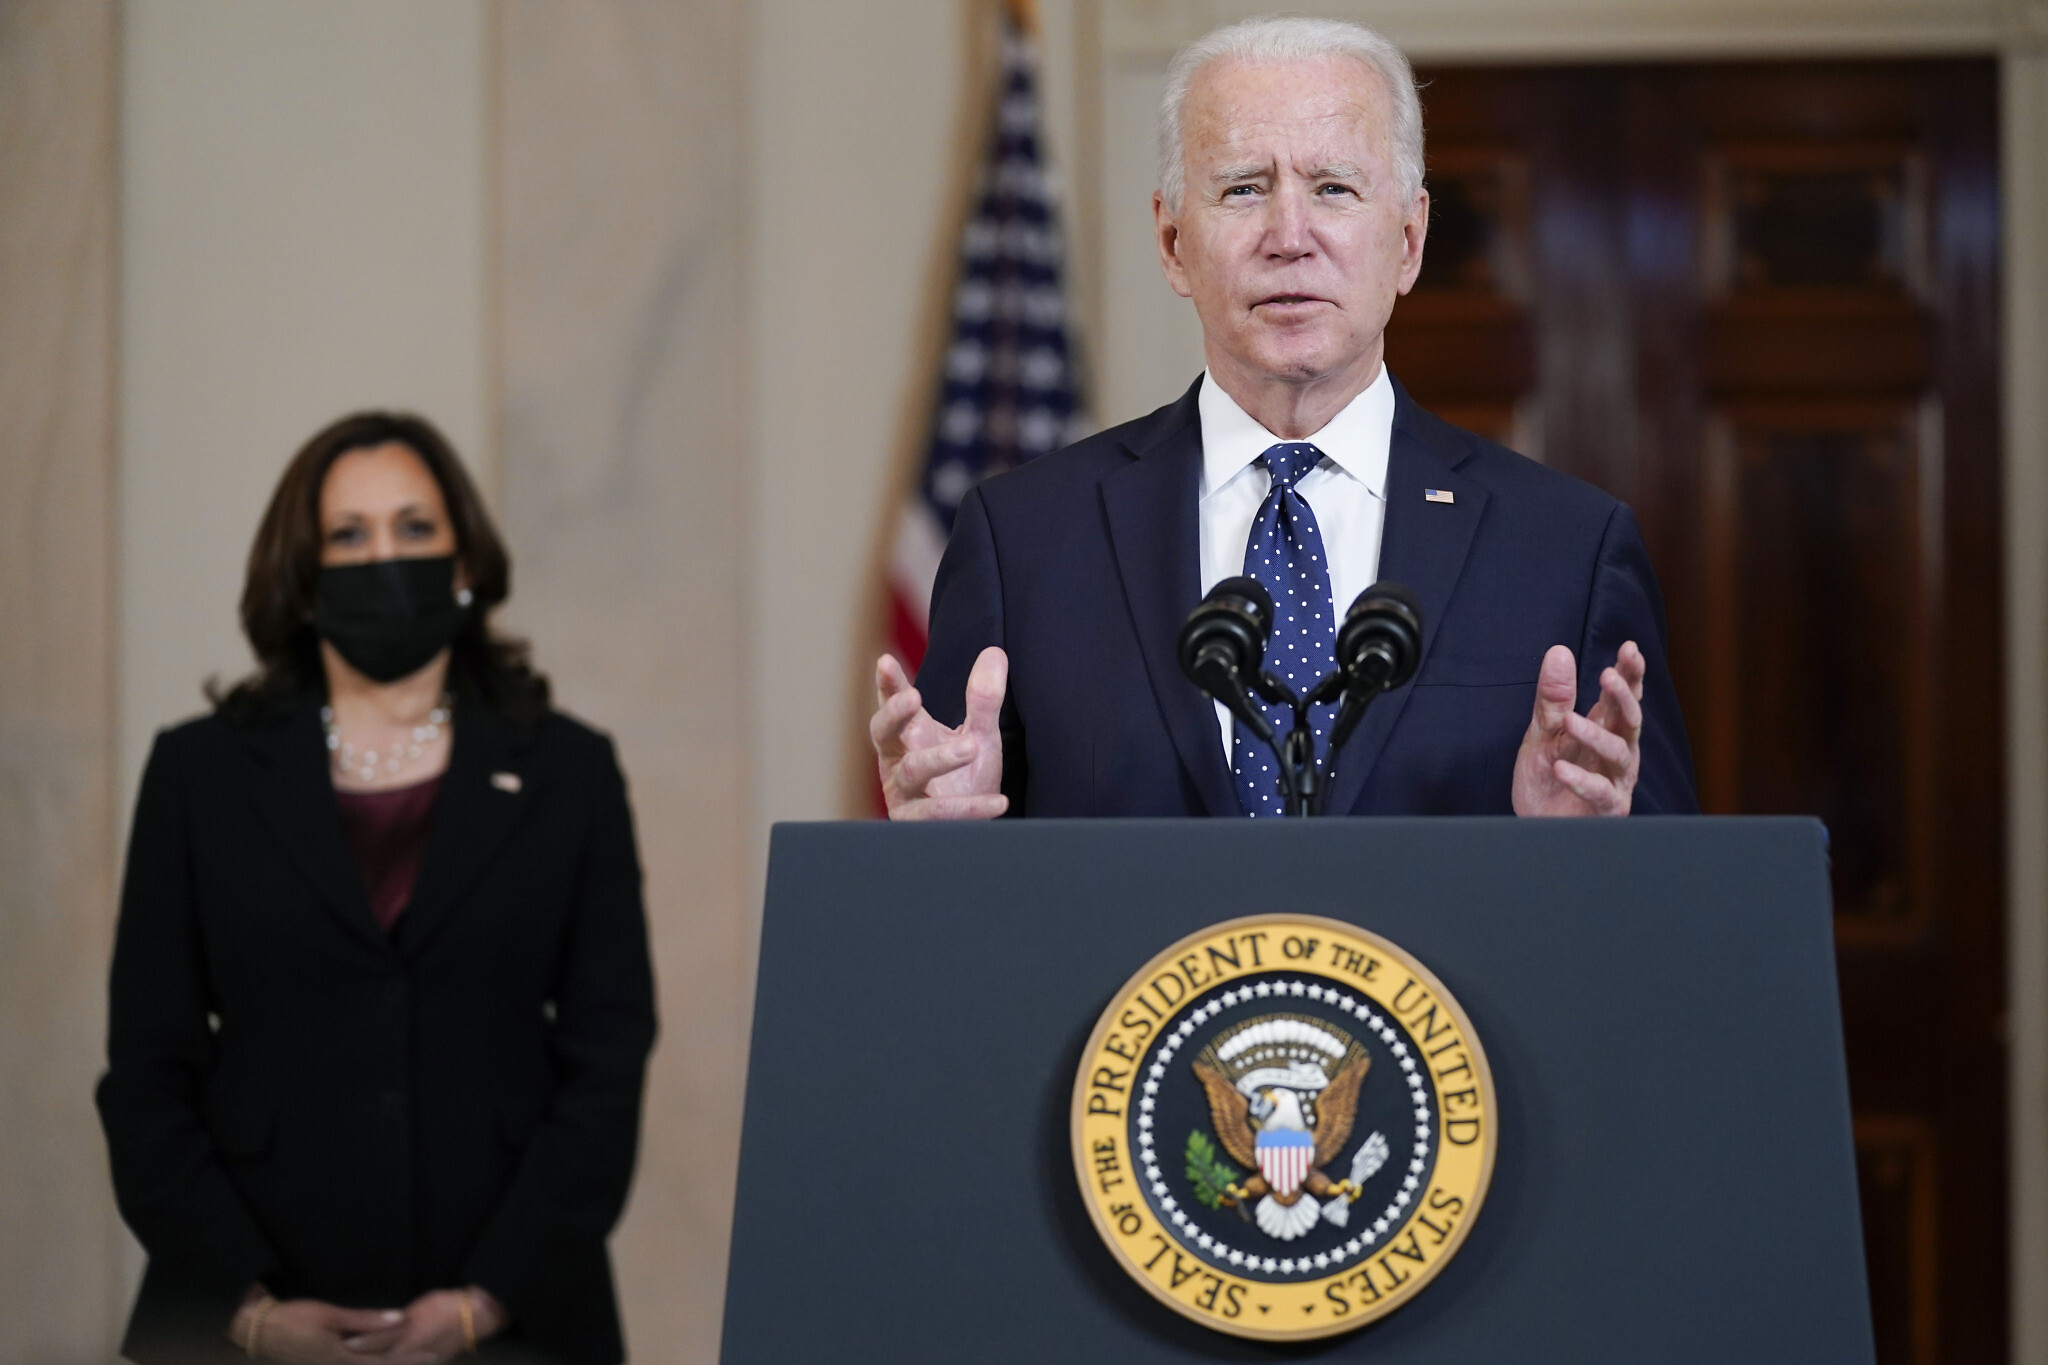 A friend in need? Biden-Harris get the flak for slow response to India’s pleas